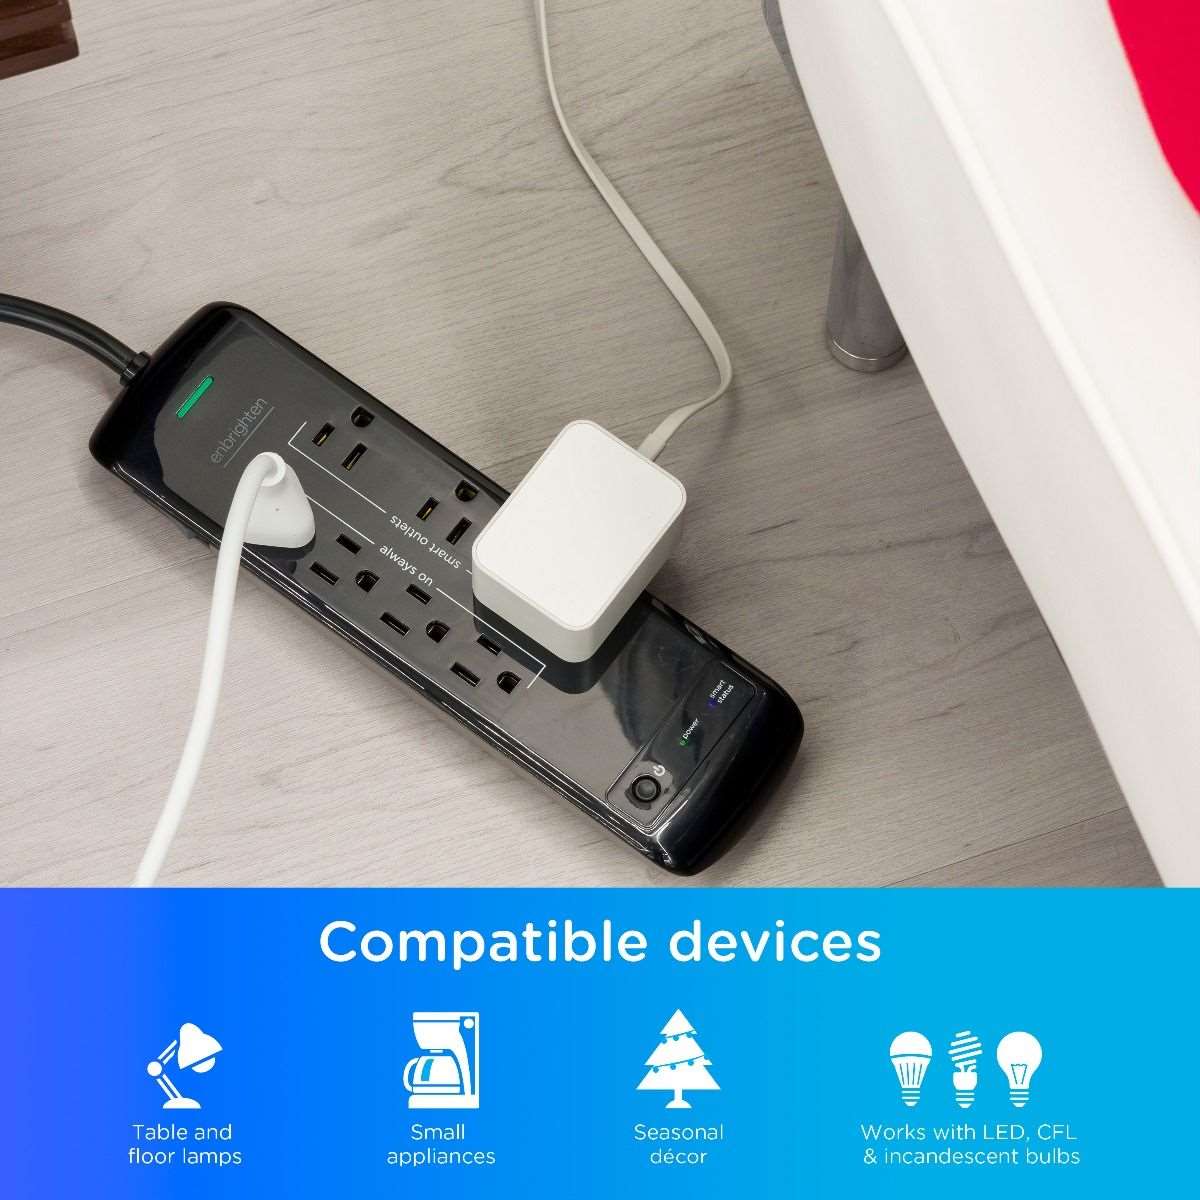 Enbrighten Elite WiFi Smart Surge Protector Power Bar with 7 Outlets - evergreenly